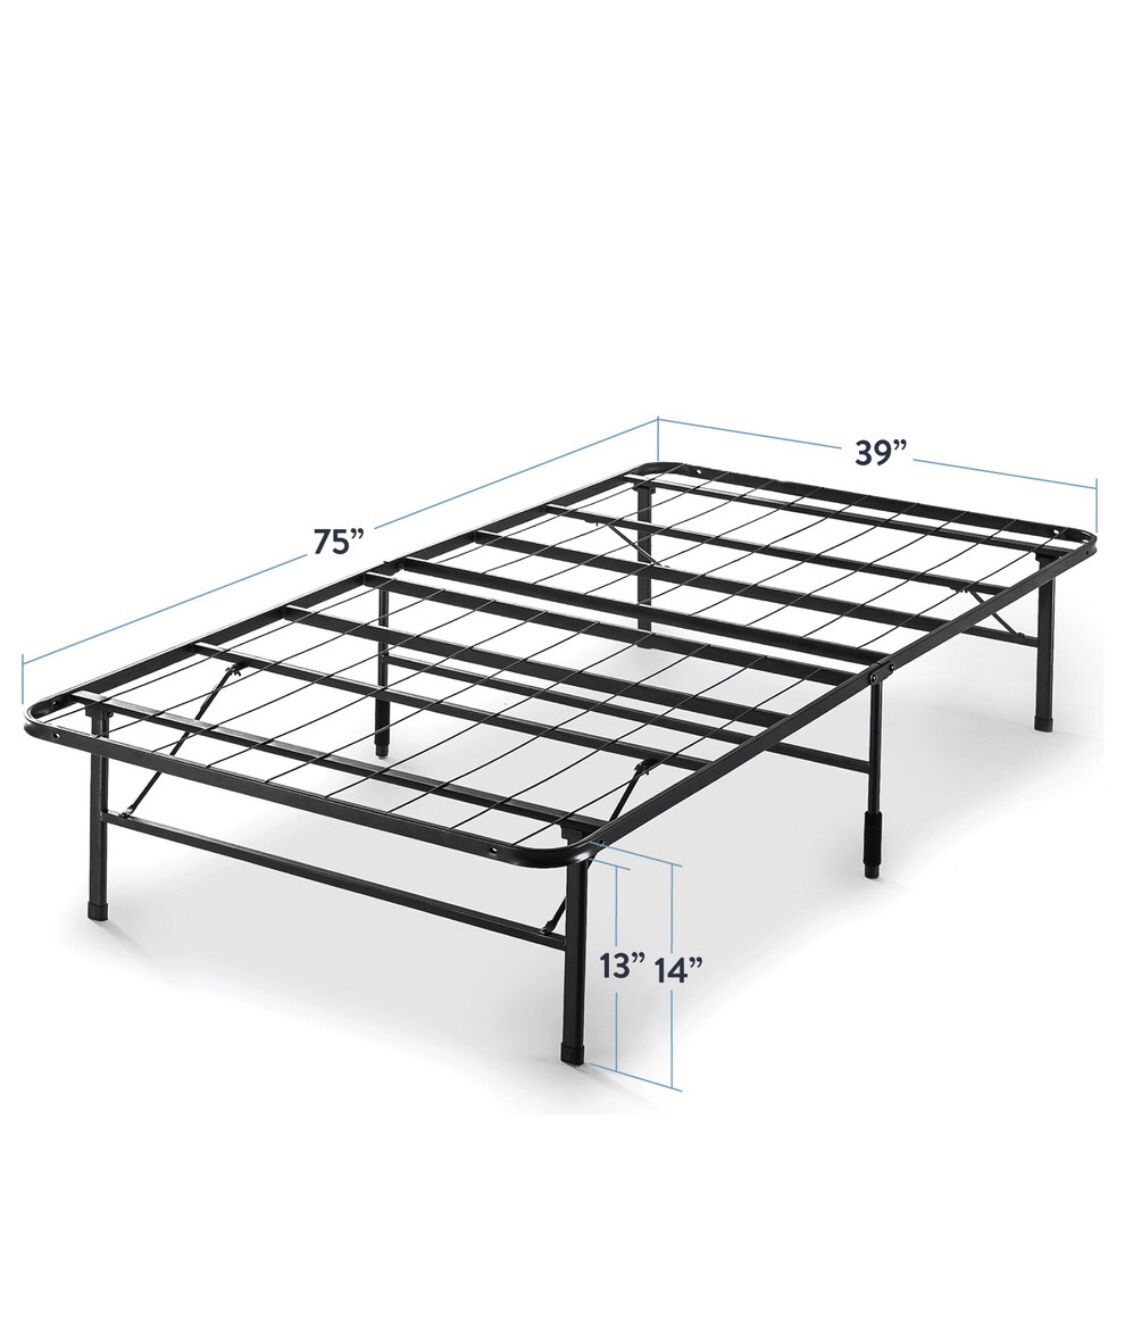 TWIN BED FRAME (40% off NEW)